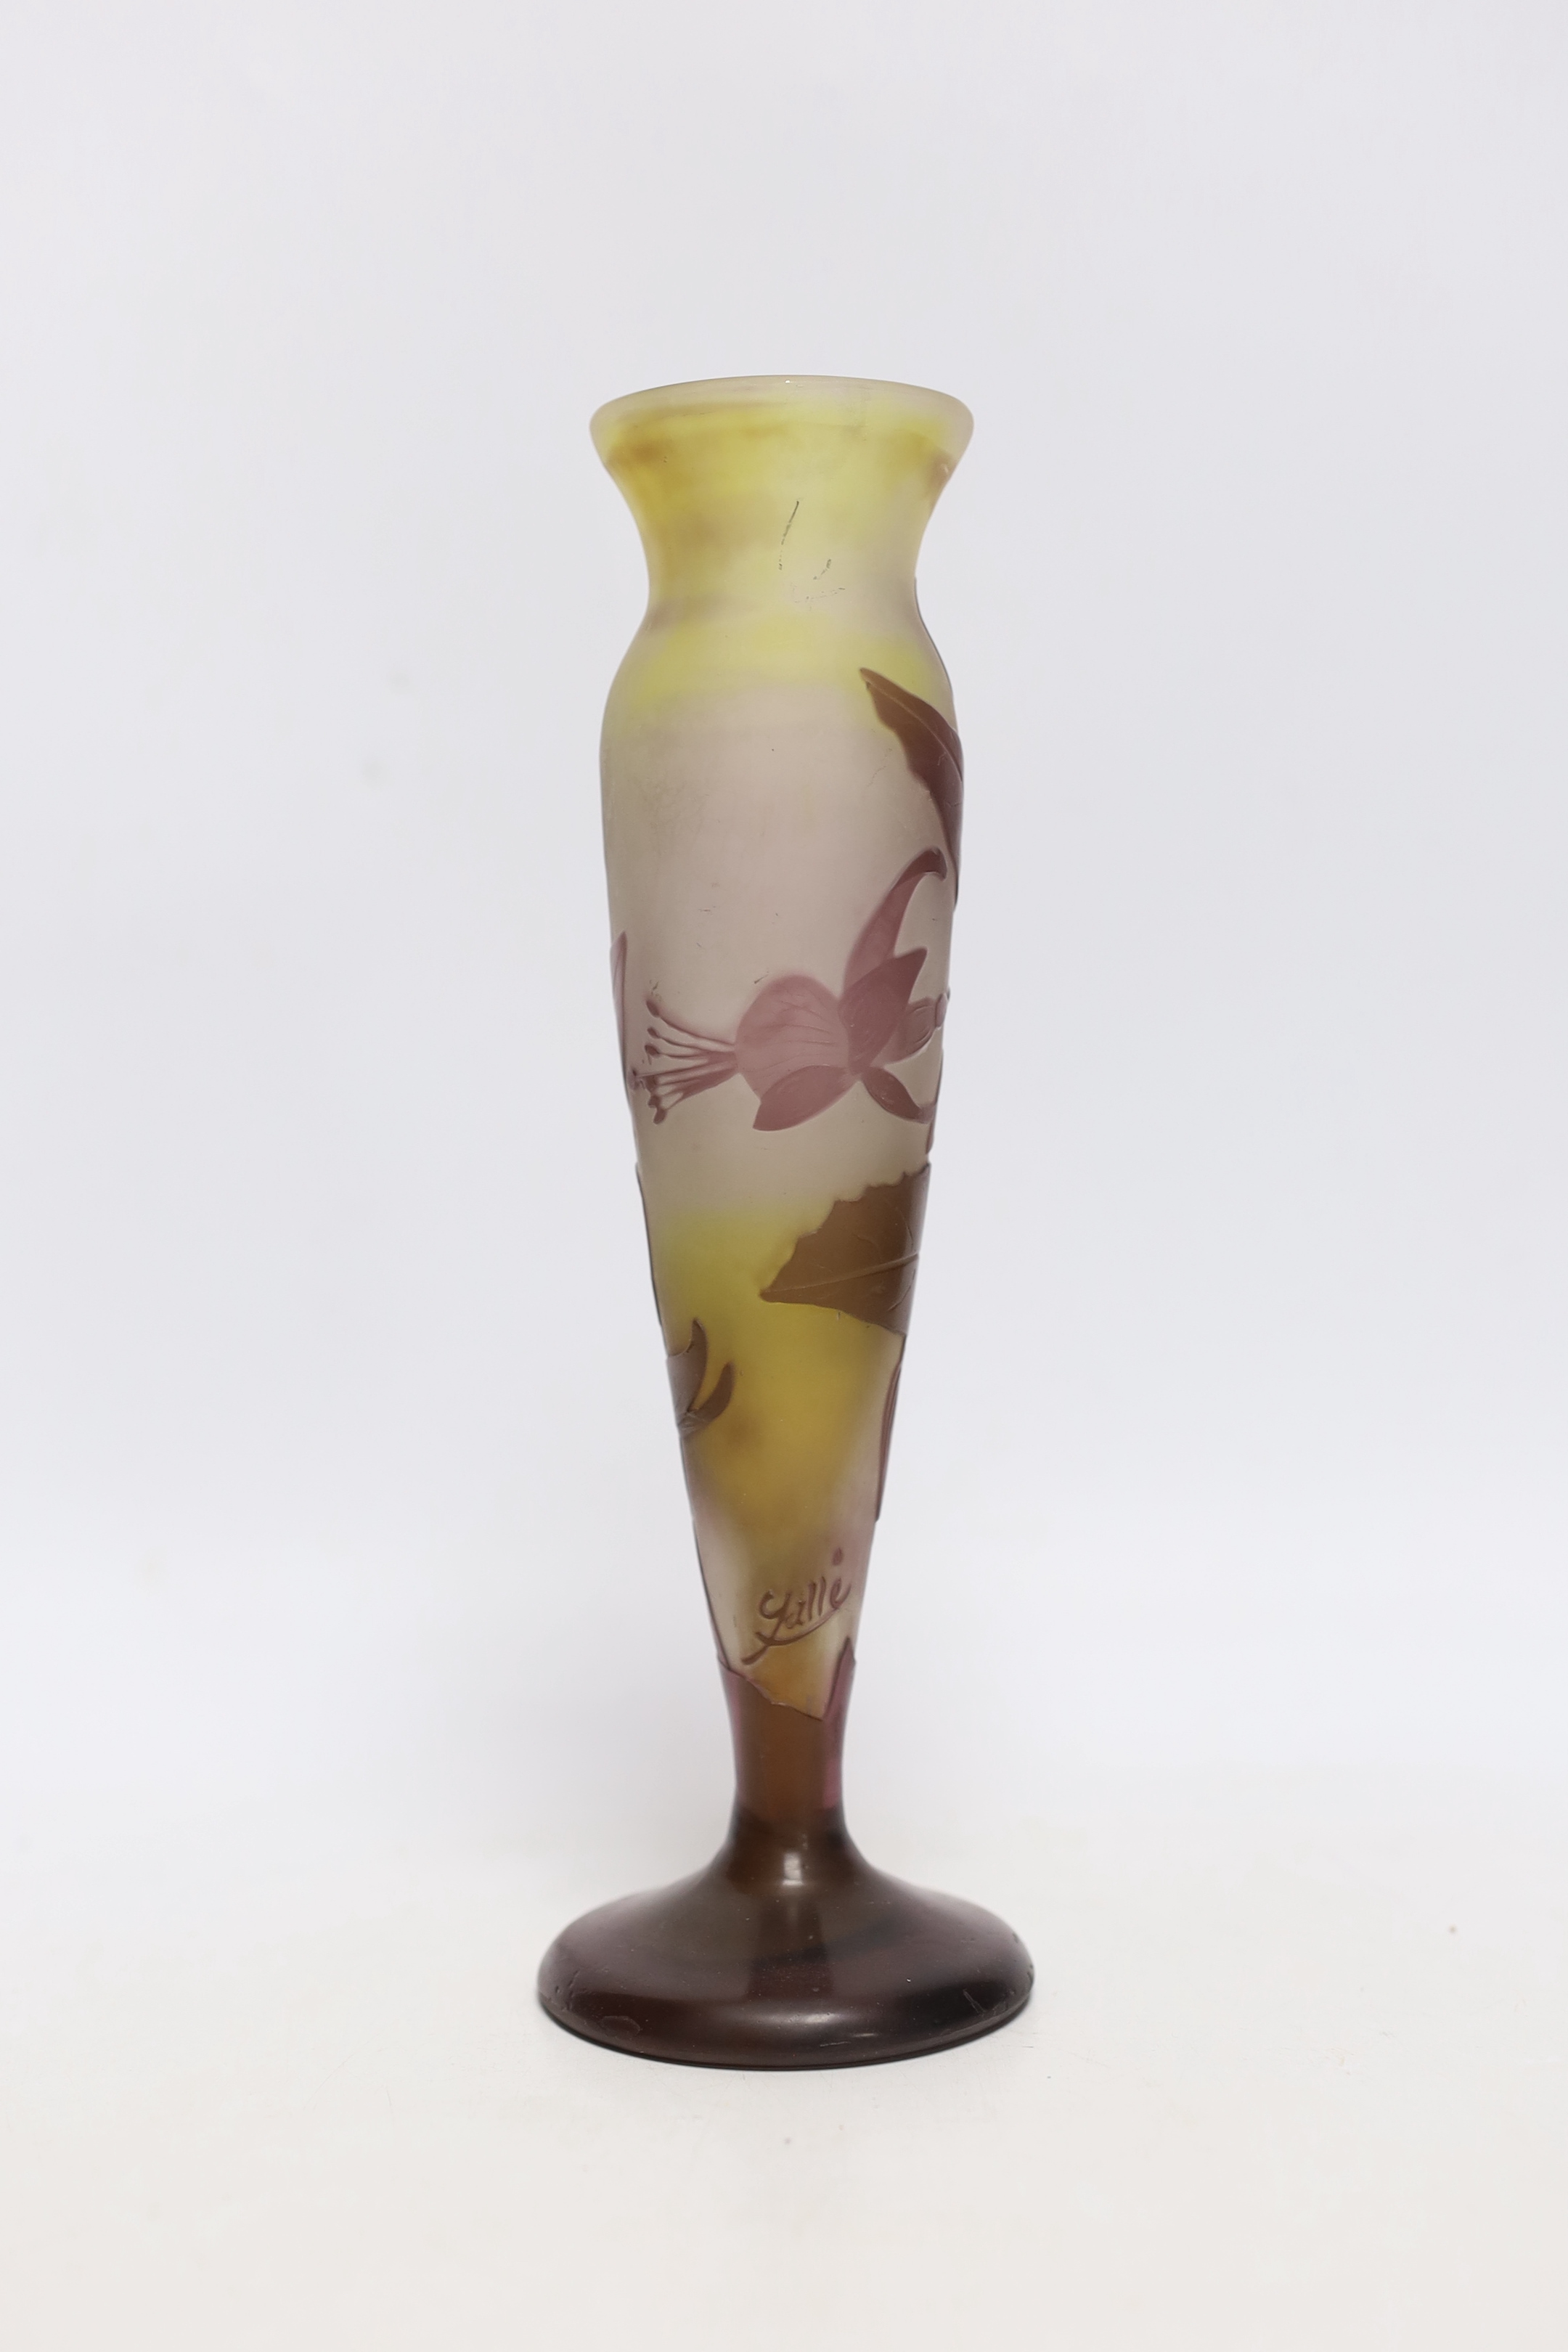 An Emile Galle cameo glass vase, signed, 24cm high